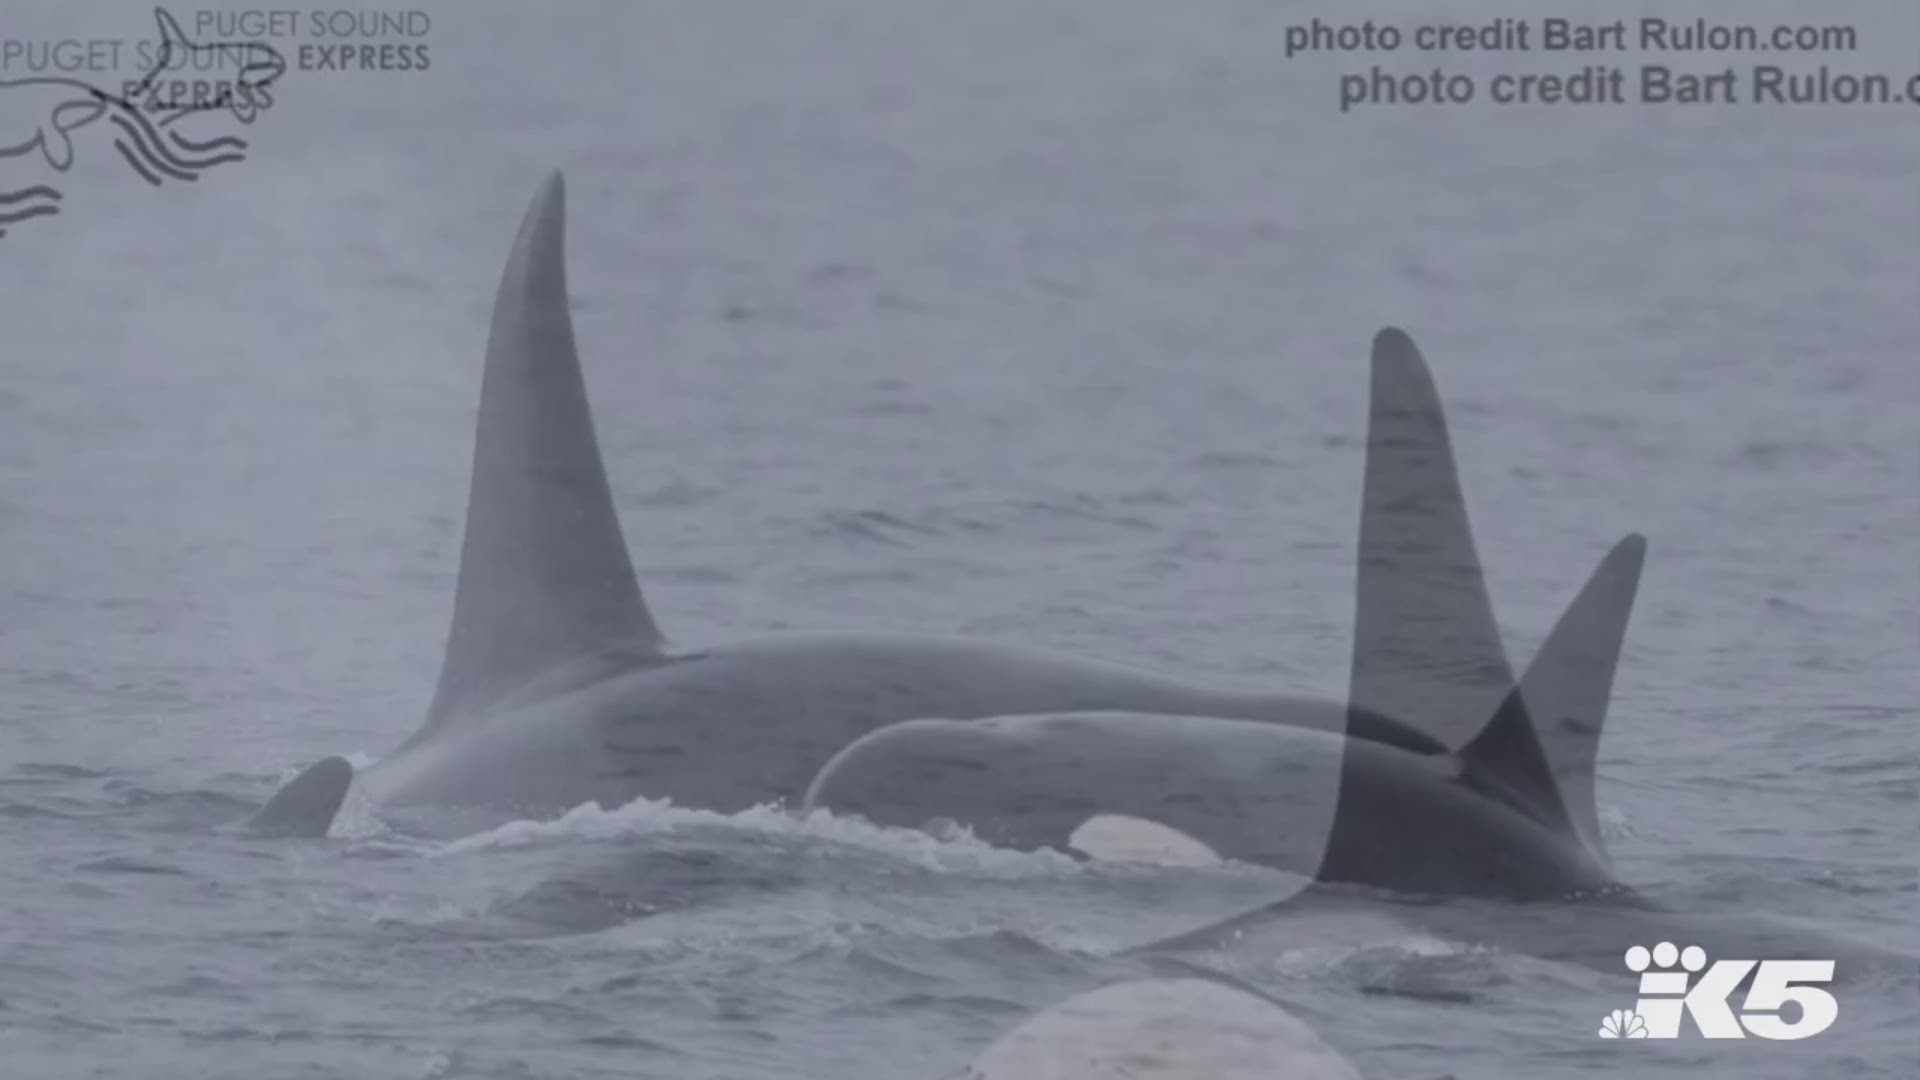 Transient orcas photographed feeding on a gray whale in Puget Sound. Photos by Naturalist Bart Rulon aboard the Puget Sound Express.